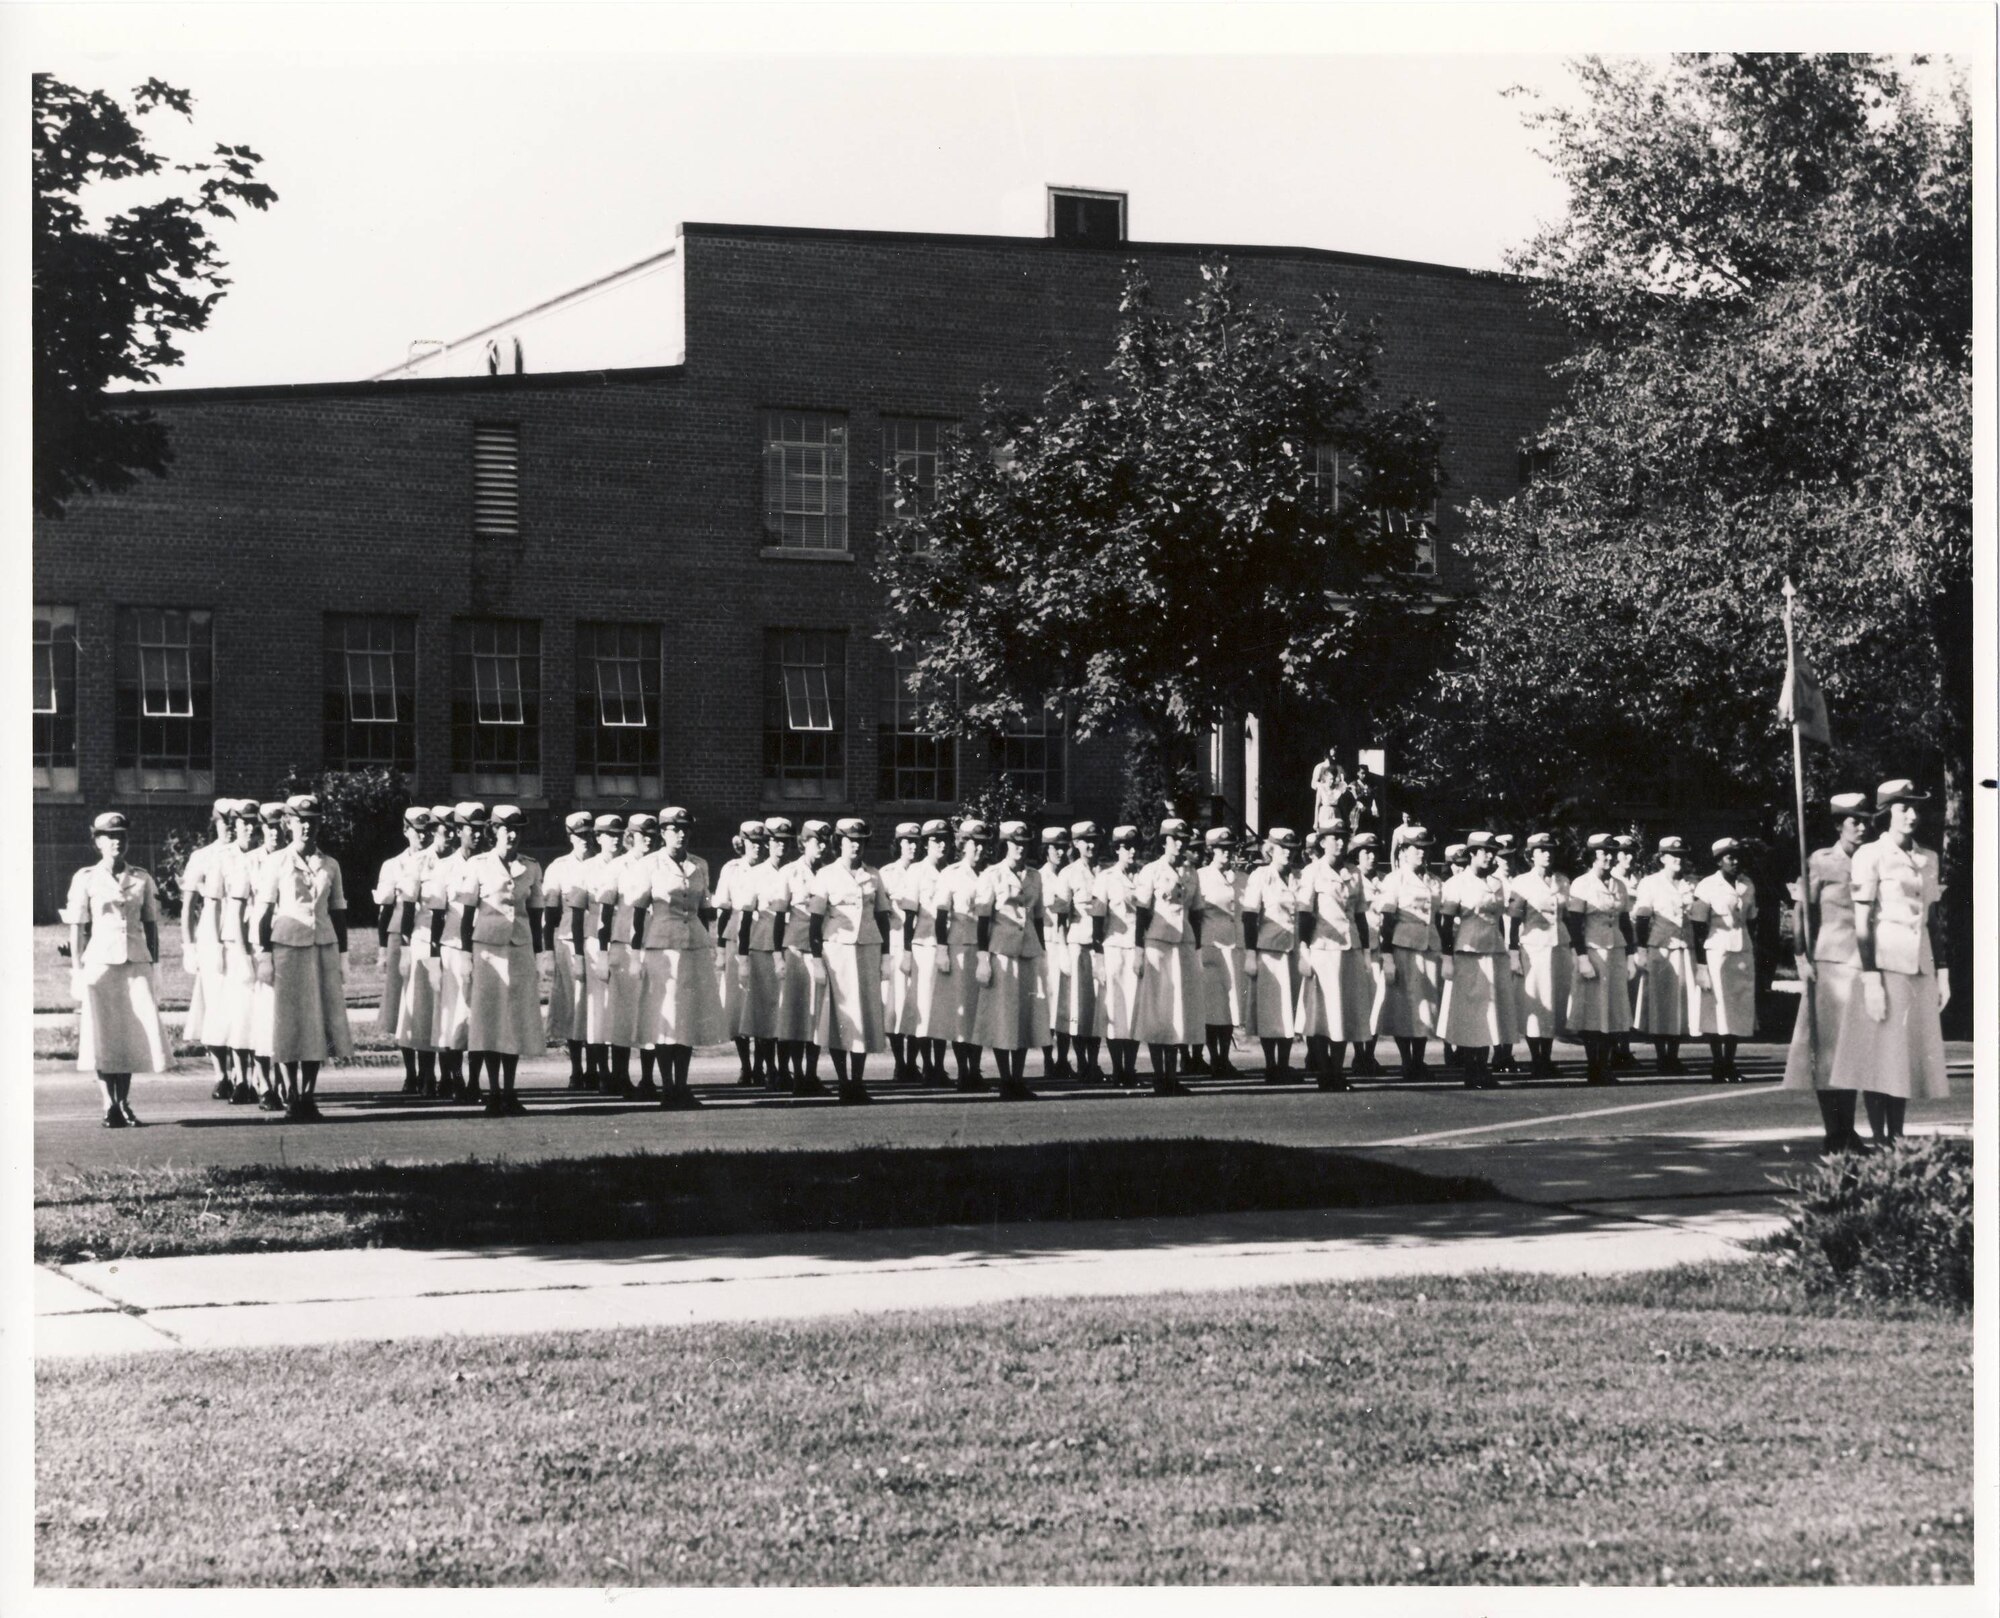 The 3005th Women in the Air Force (WAF) Squadron began its assignment at Hill AFB. This squadron served at the installation until its inactivation on December 6, 1954.